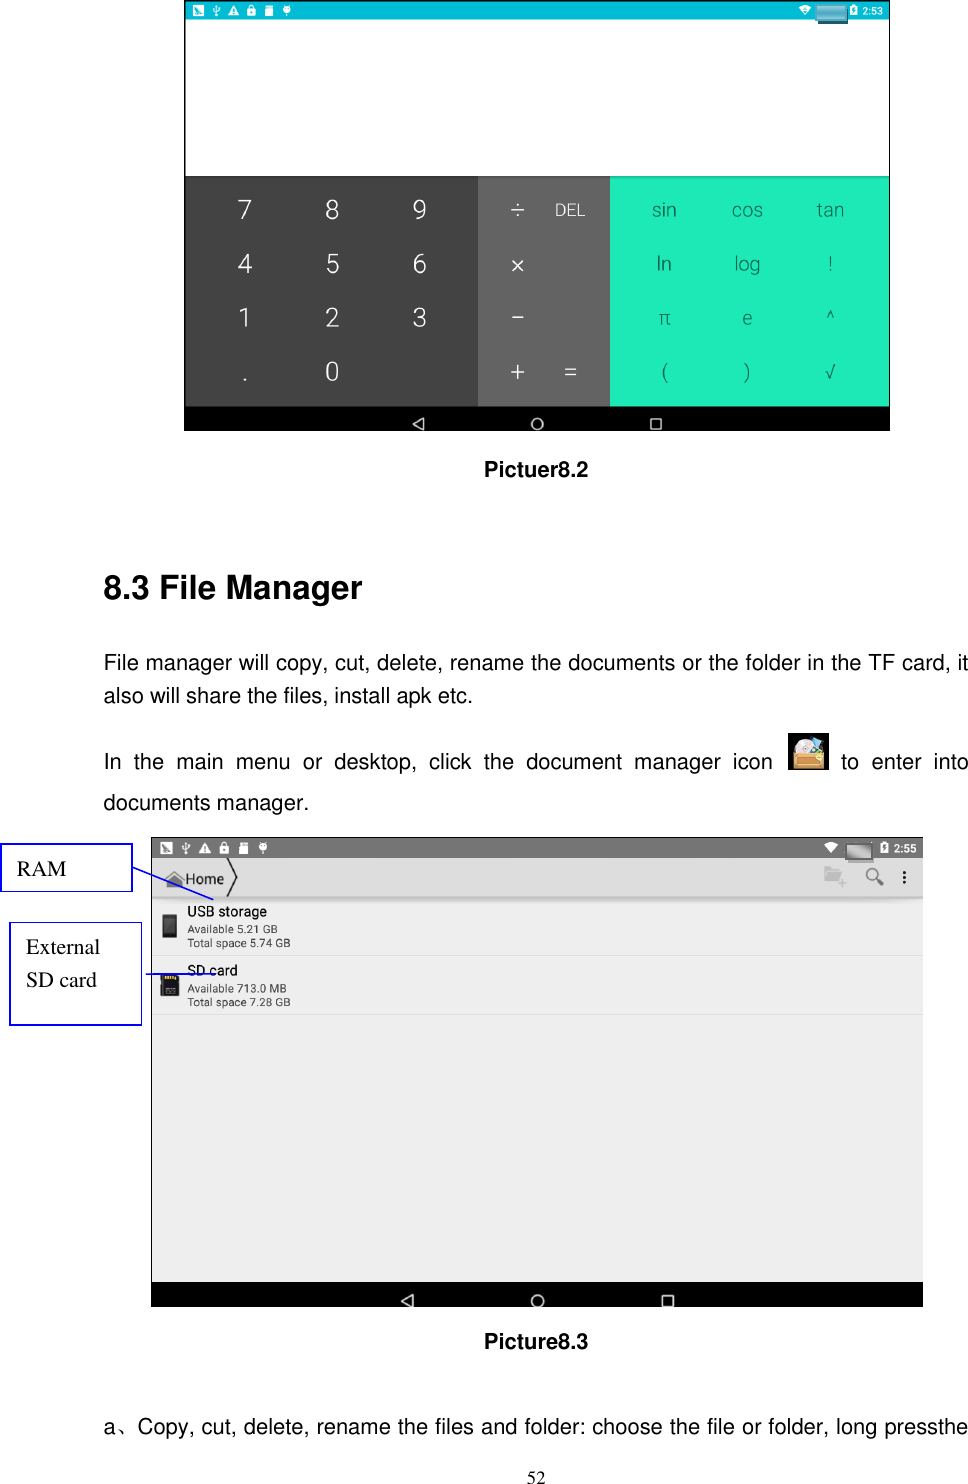      52  Pictuer8.2  8.3 File Manager File manager will copy, cut, delete, rename the documents or the folder in the TF card, it also will share the files, install apk etc. In  the  main  menu  or  desktop,  click  the  document  manager  icon    to  enter  into documents manager.  Picture8.3  a、Copy, cut, delete, rename the files and folder: choose the file or folder, long pressthe RAM  External SD card 